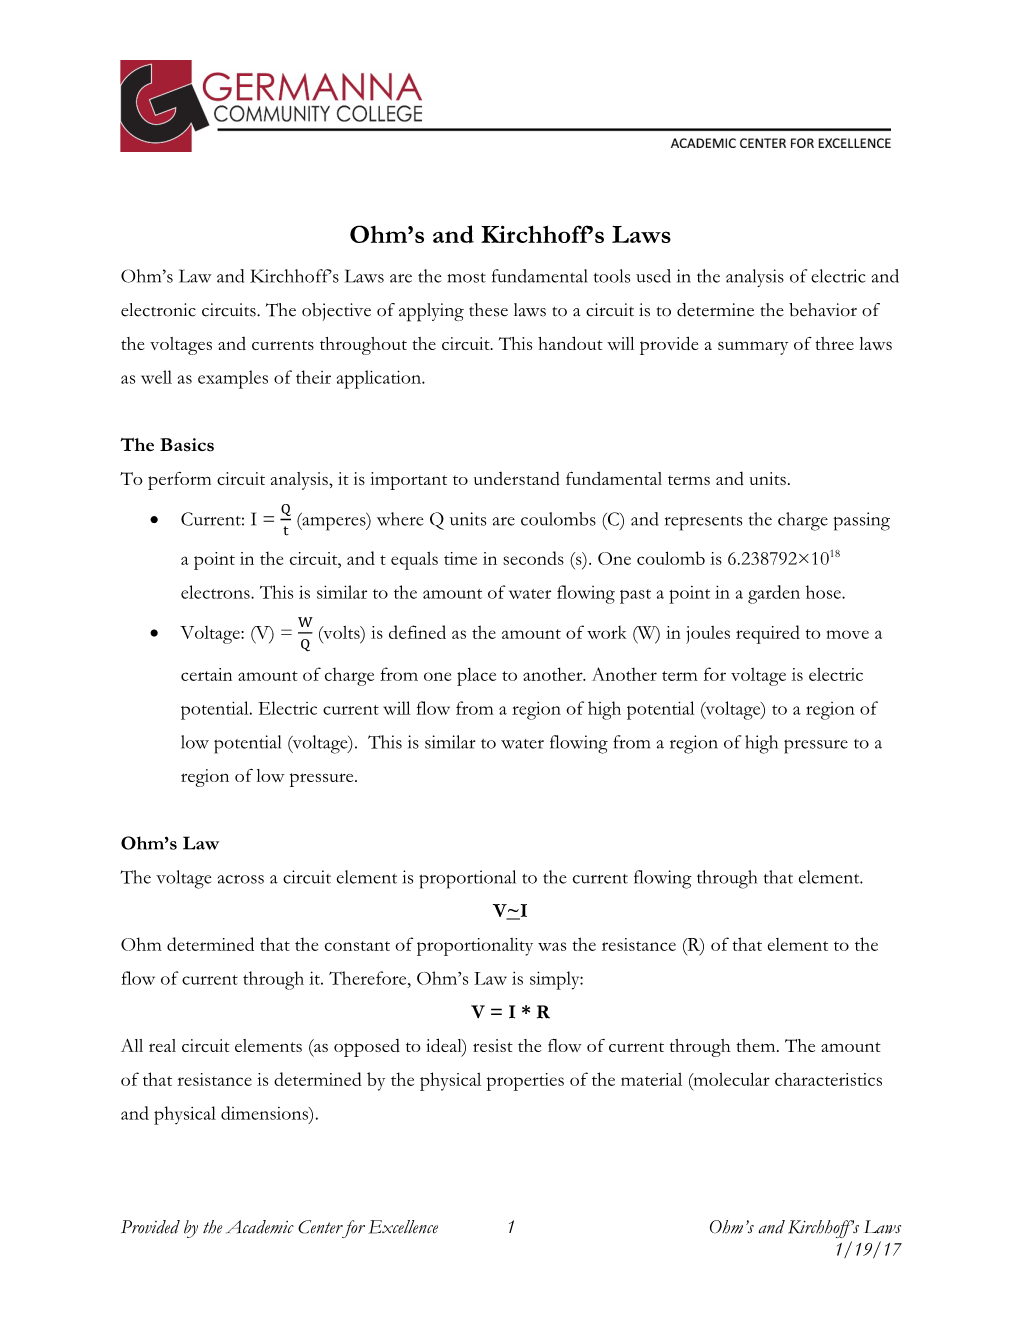 Ohm's and Kirchhoff's Laws